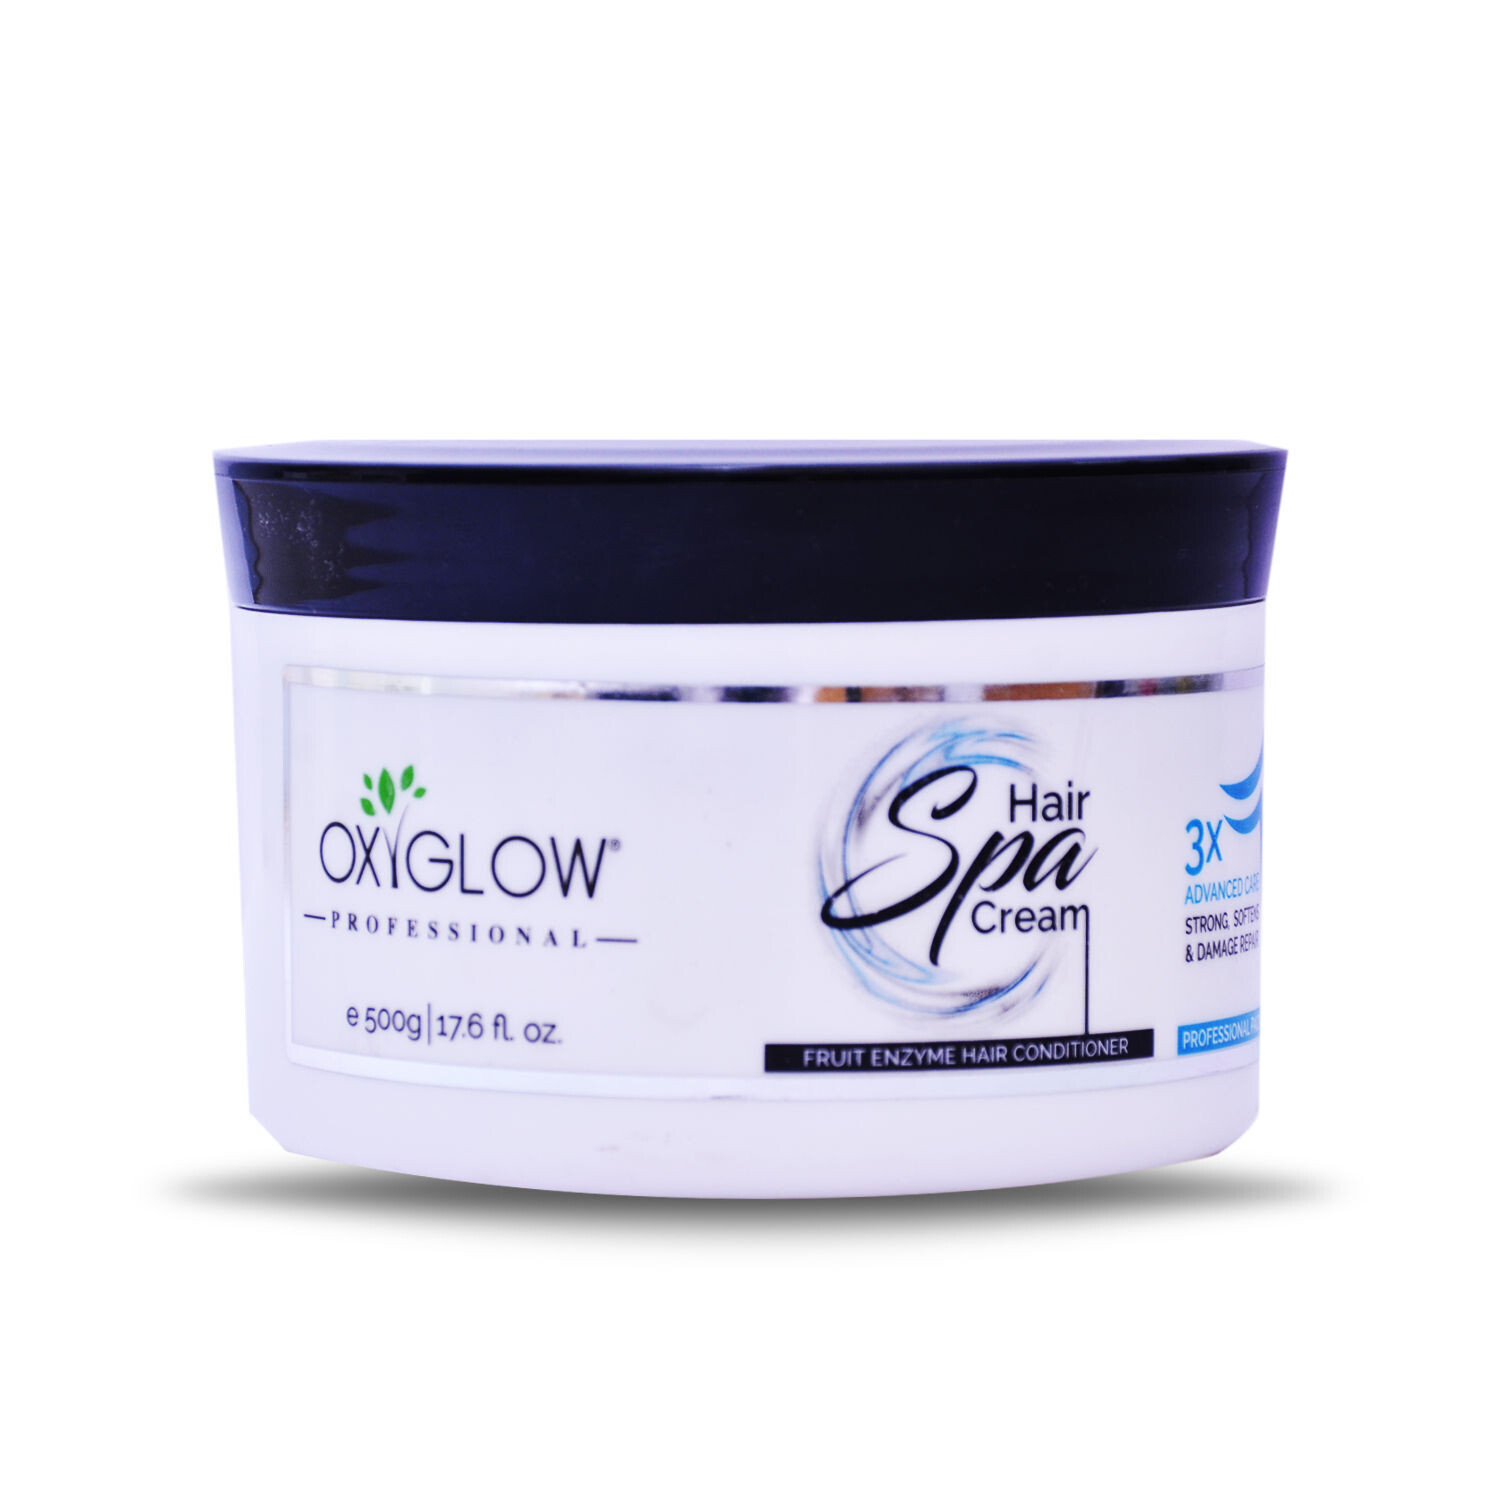 Oxyglow Proffesional 3x Advance Care Hair Spa Cream (500 g)